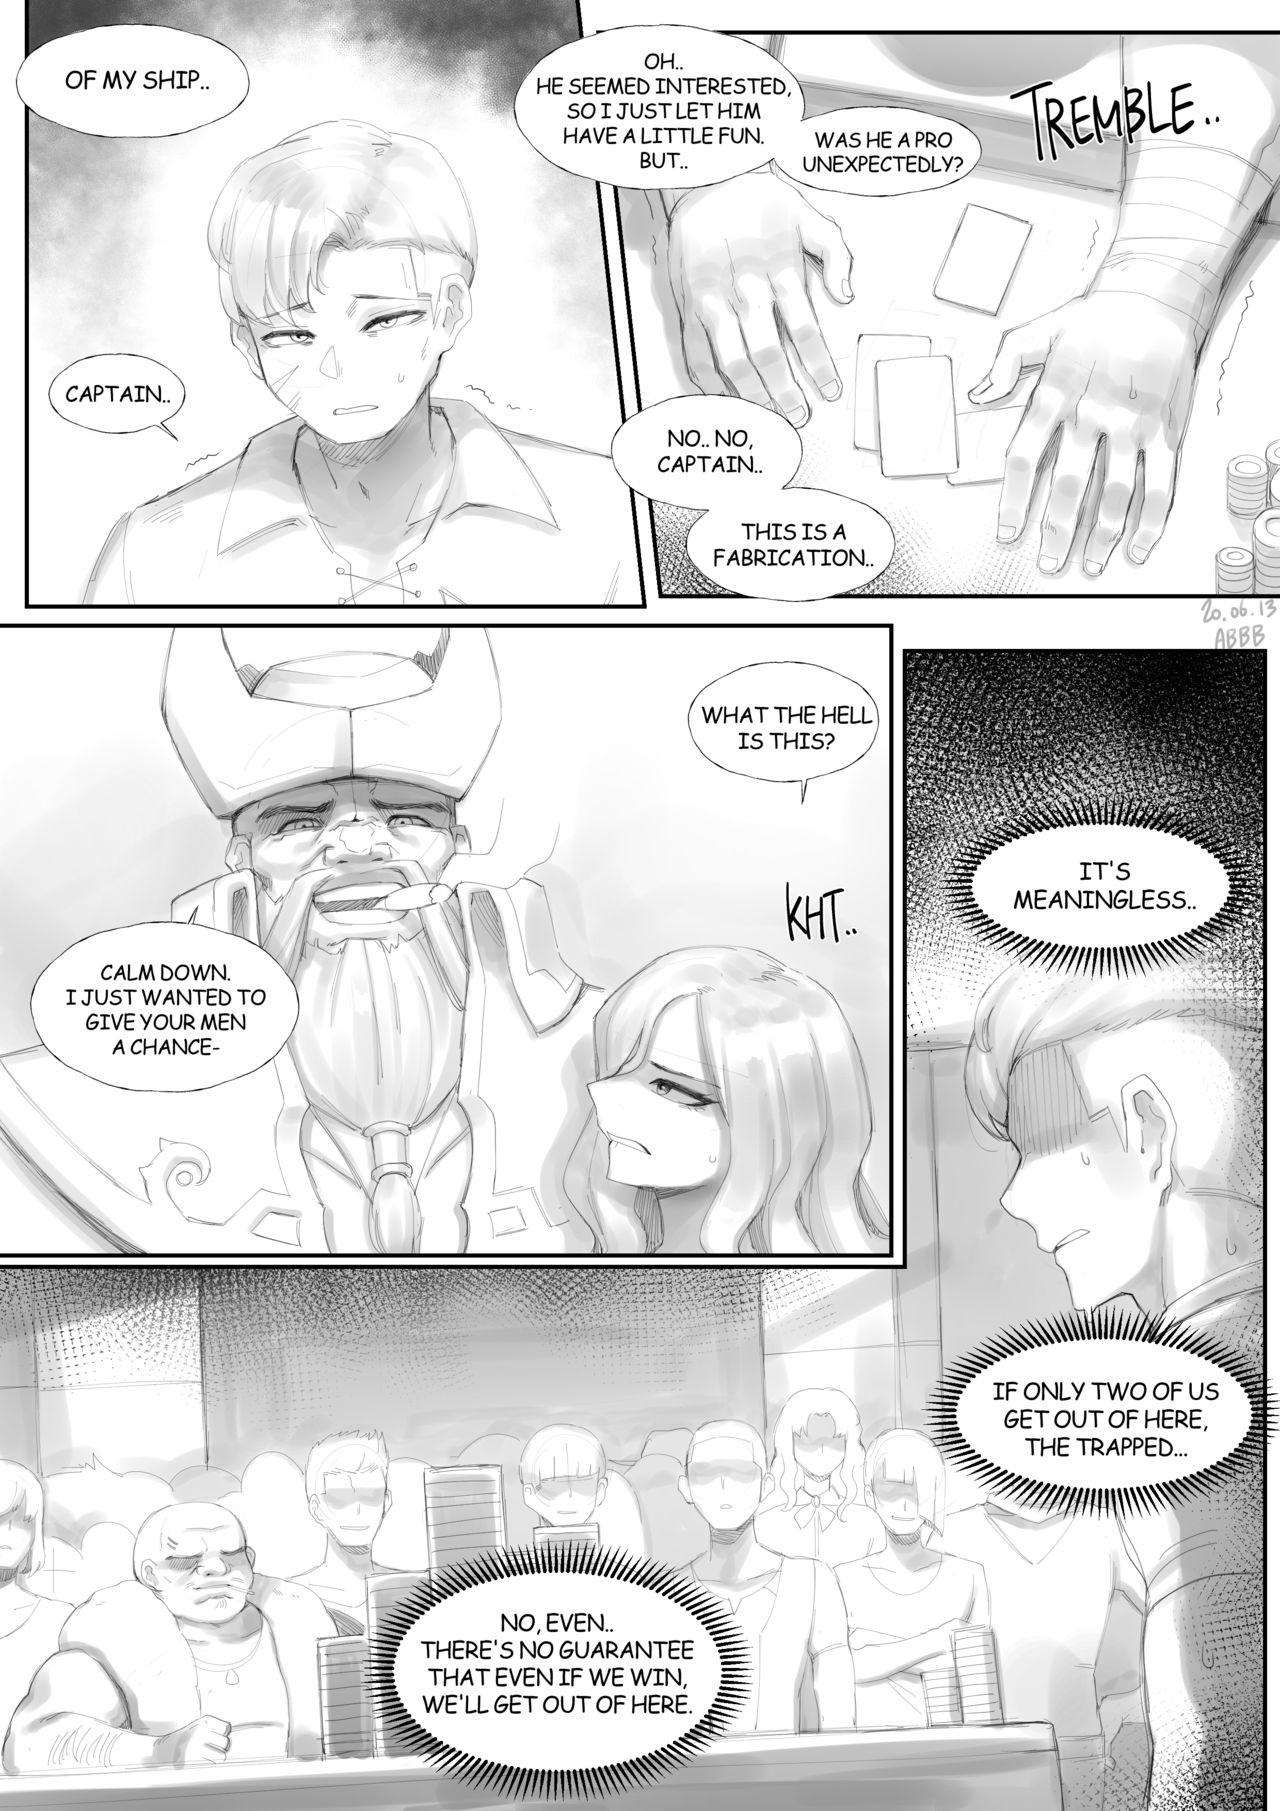 Jerking Miss Fortune - League of legends Comedor - Page 9